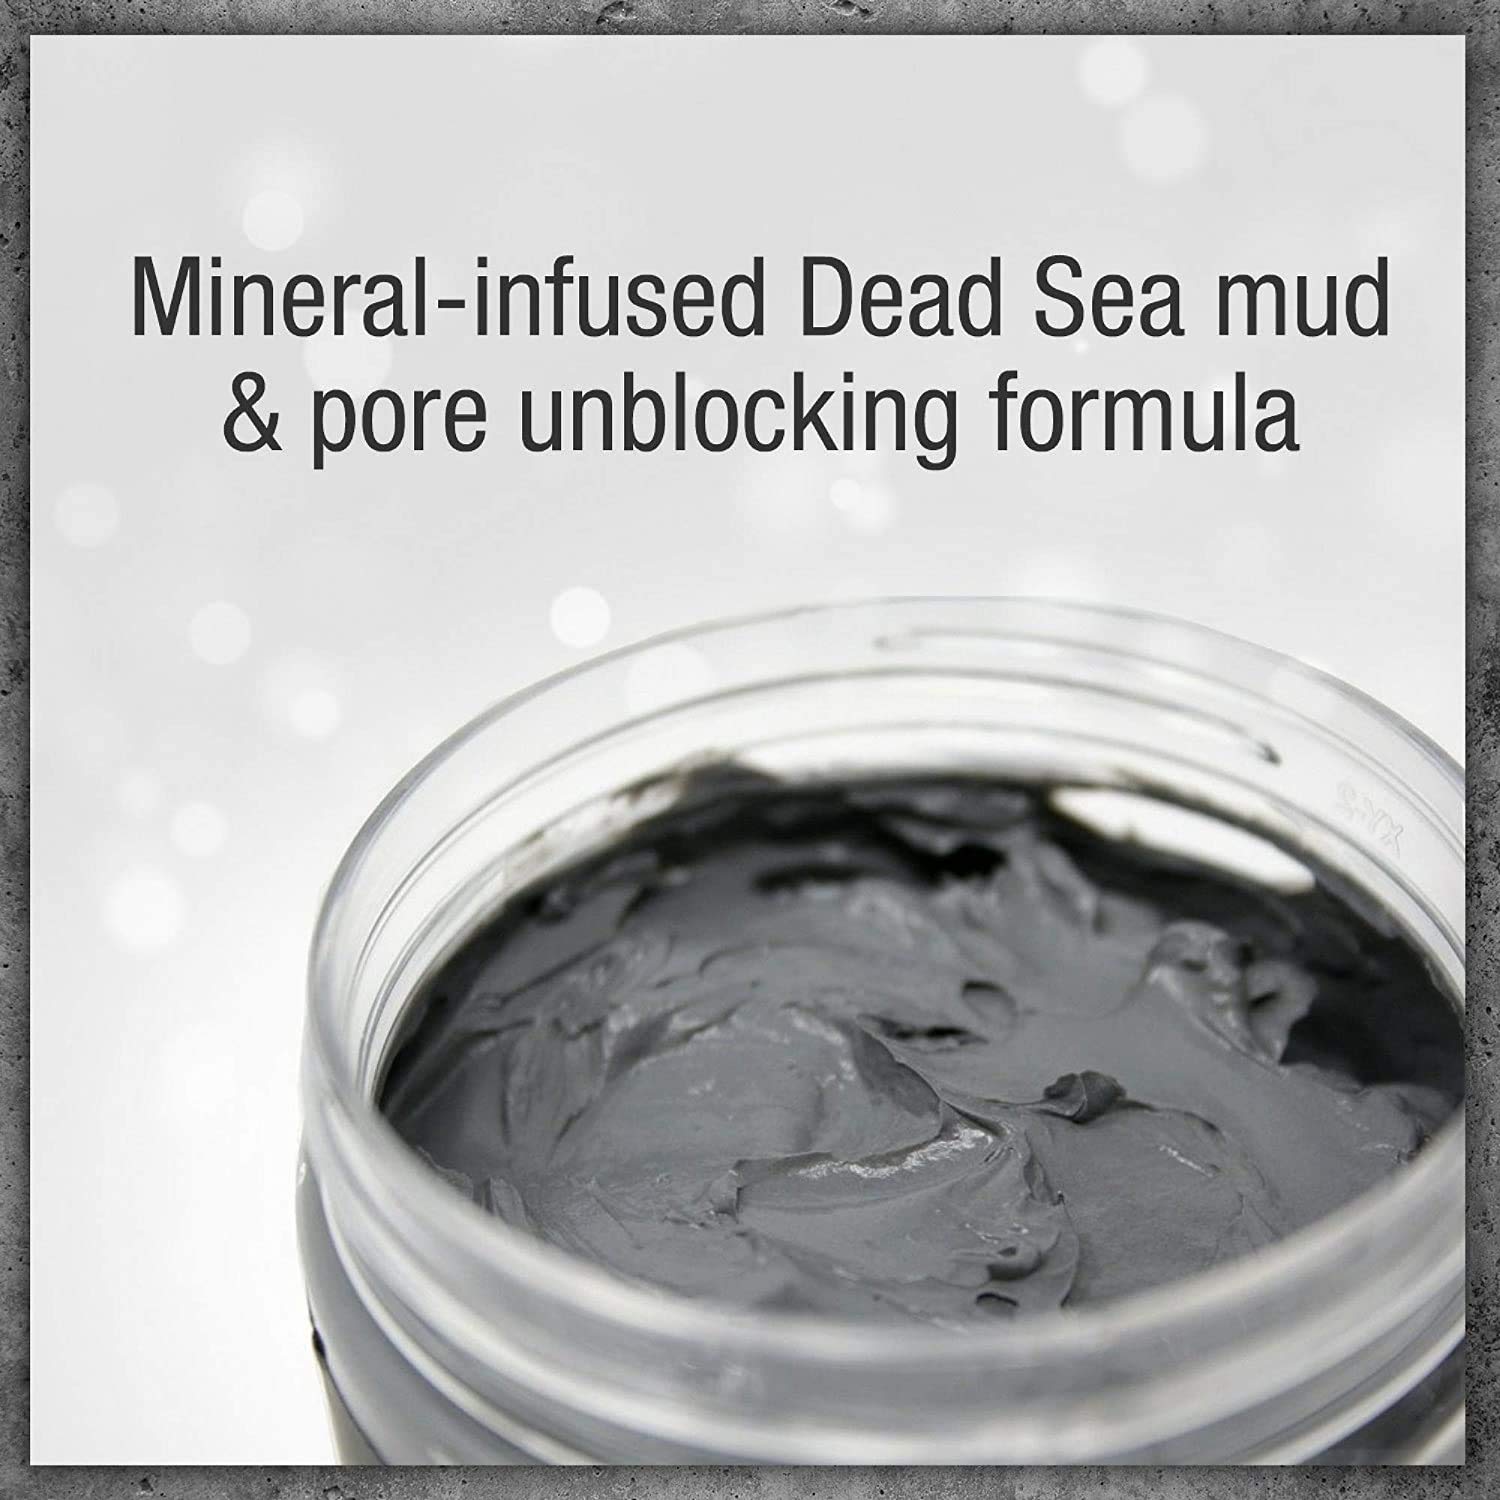 Pure Body Naturals Dead Sea Mud Mask - Face Mask and Body Mud for Acne, Blackheads, and Oily Skin - Facial Self Care for Men and Women - Minimize Pores with Deadsea Mud, Clay, Charcoal - 8.8 Ounce